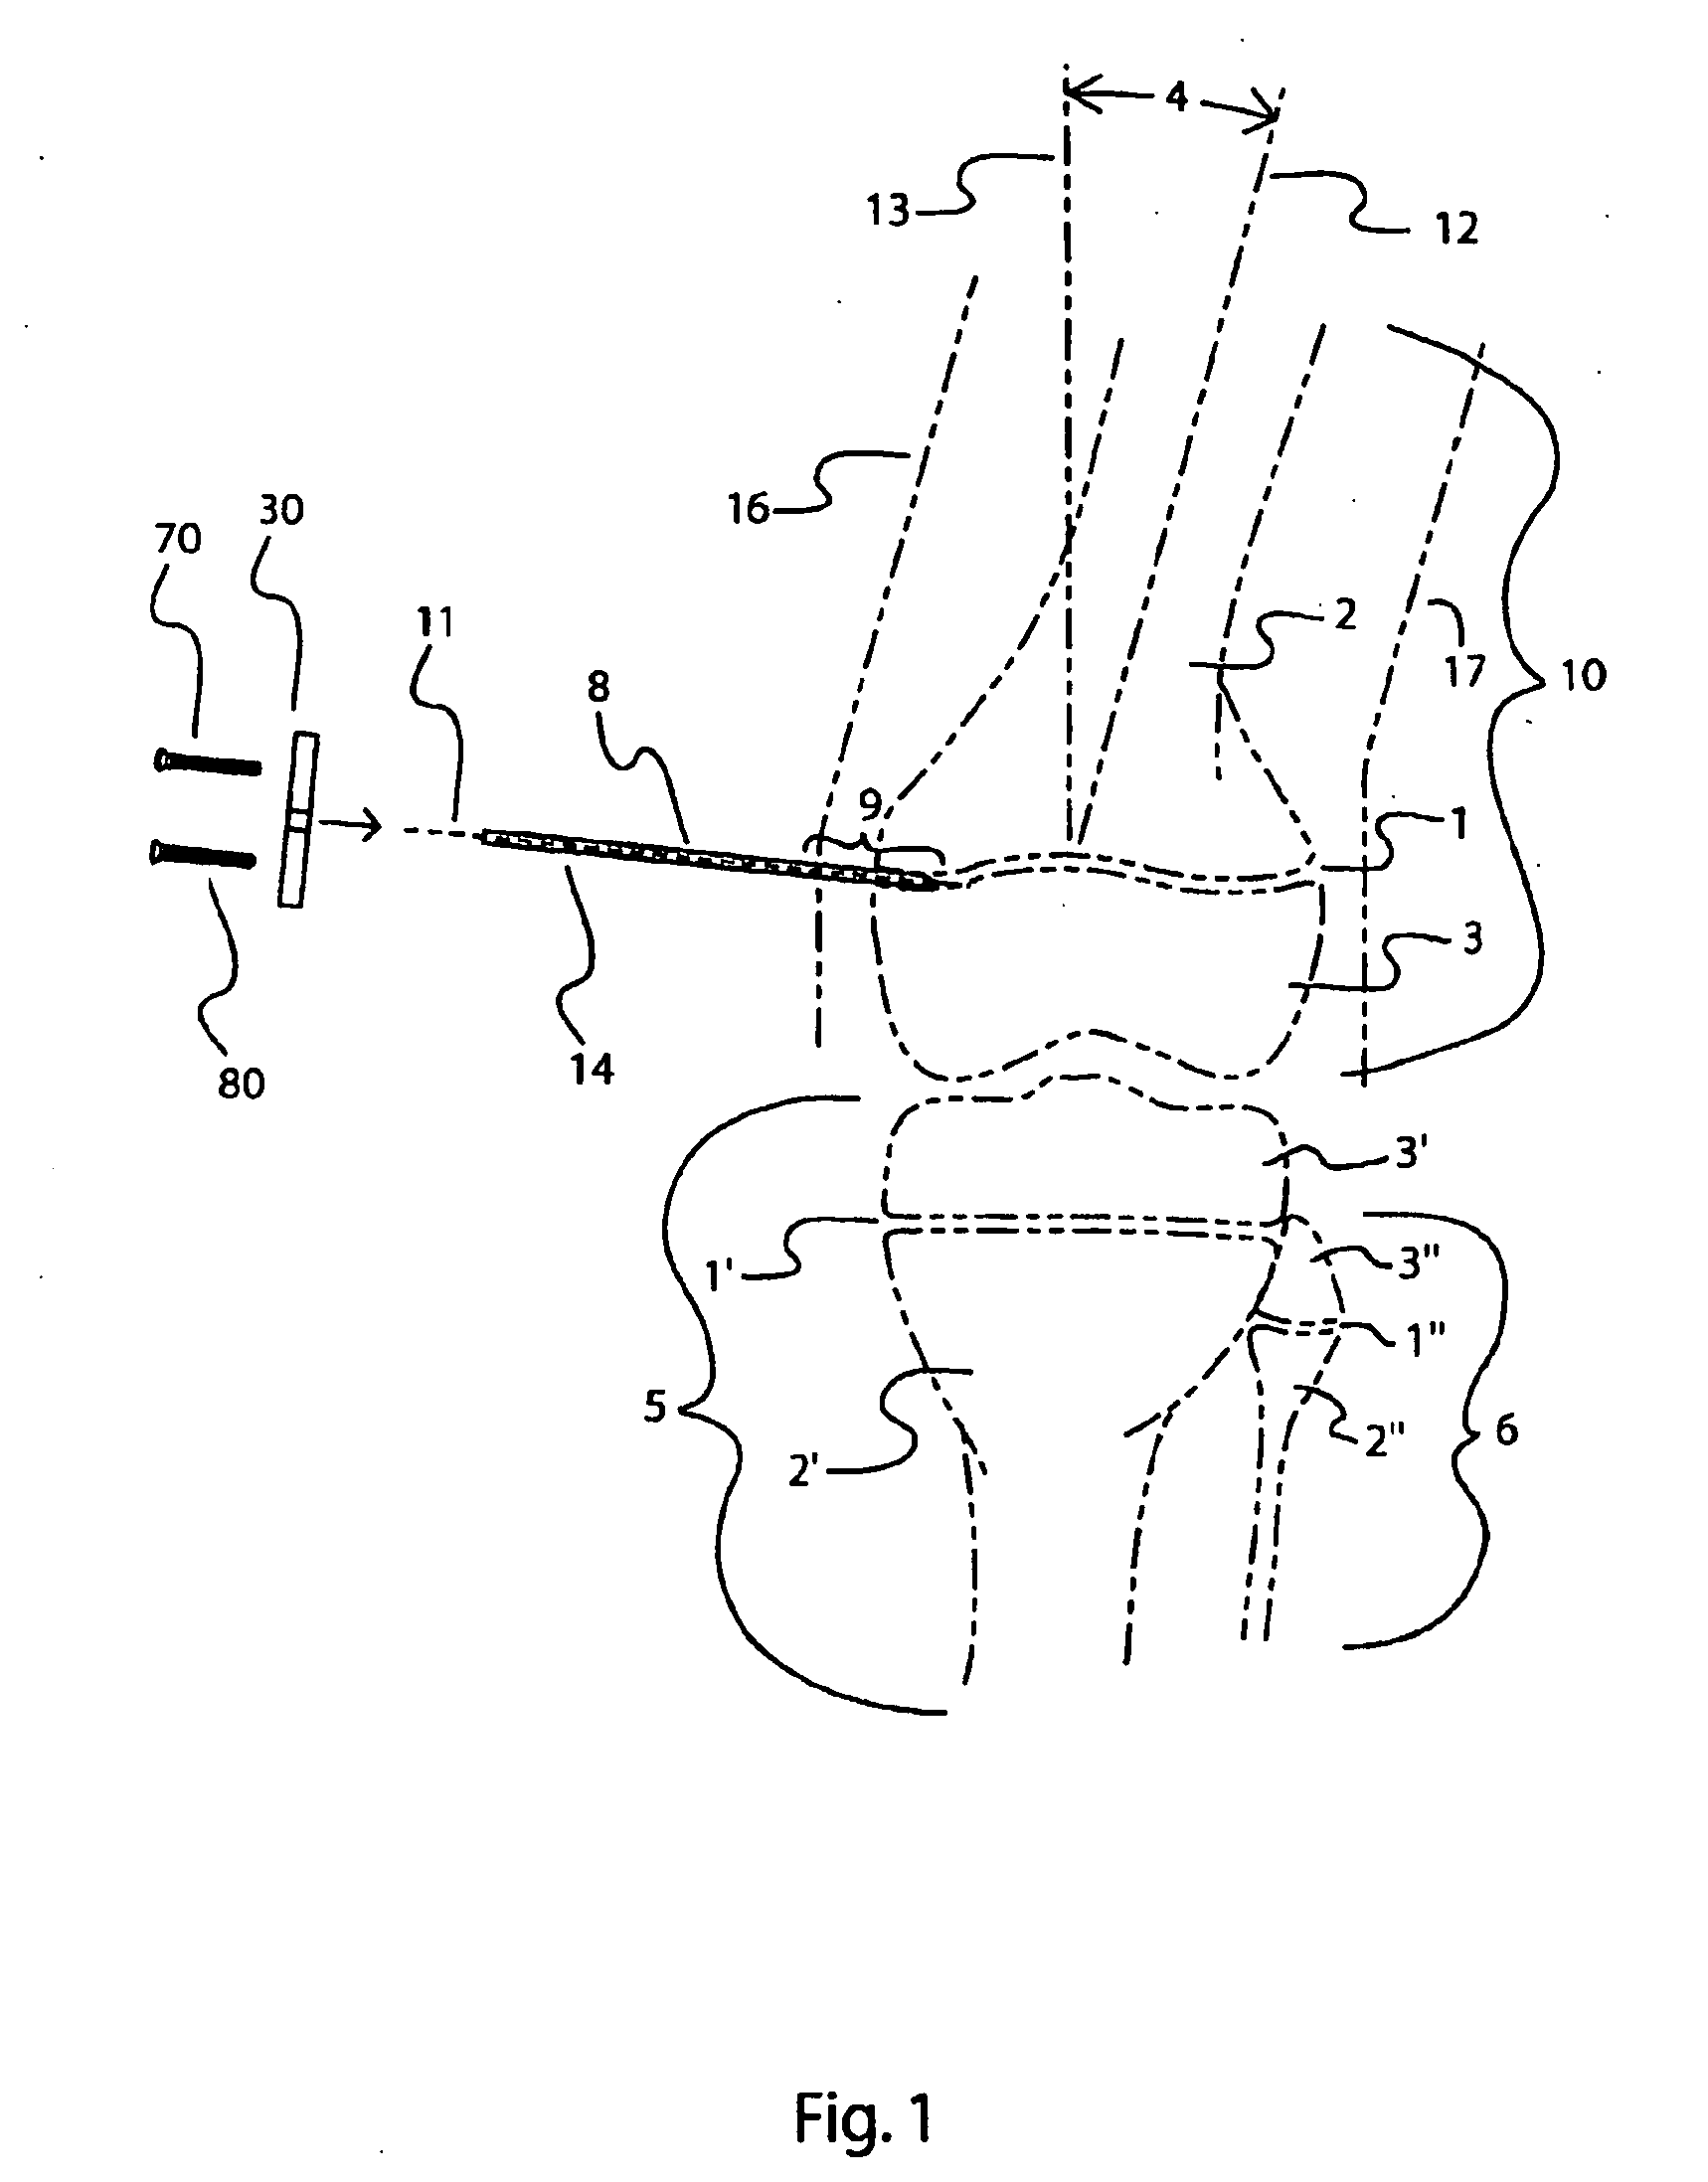 Bone alignment implant and method of use